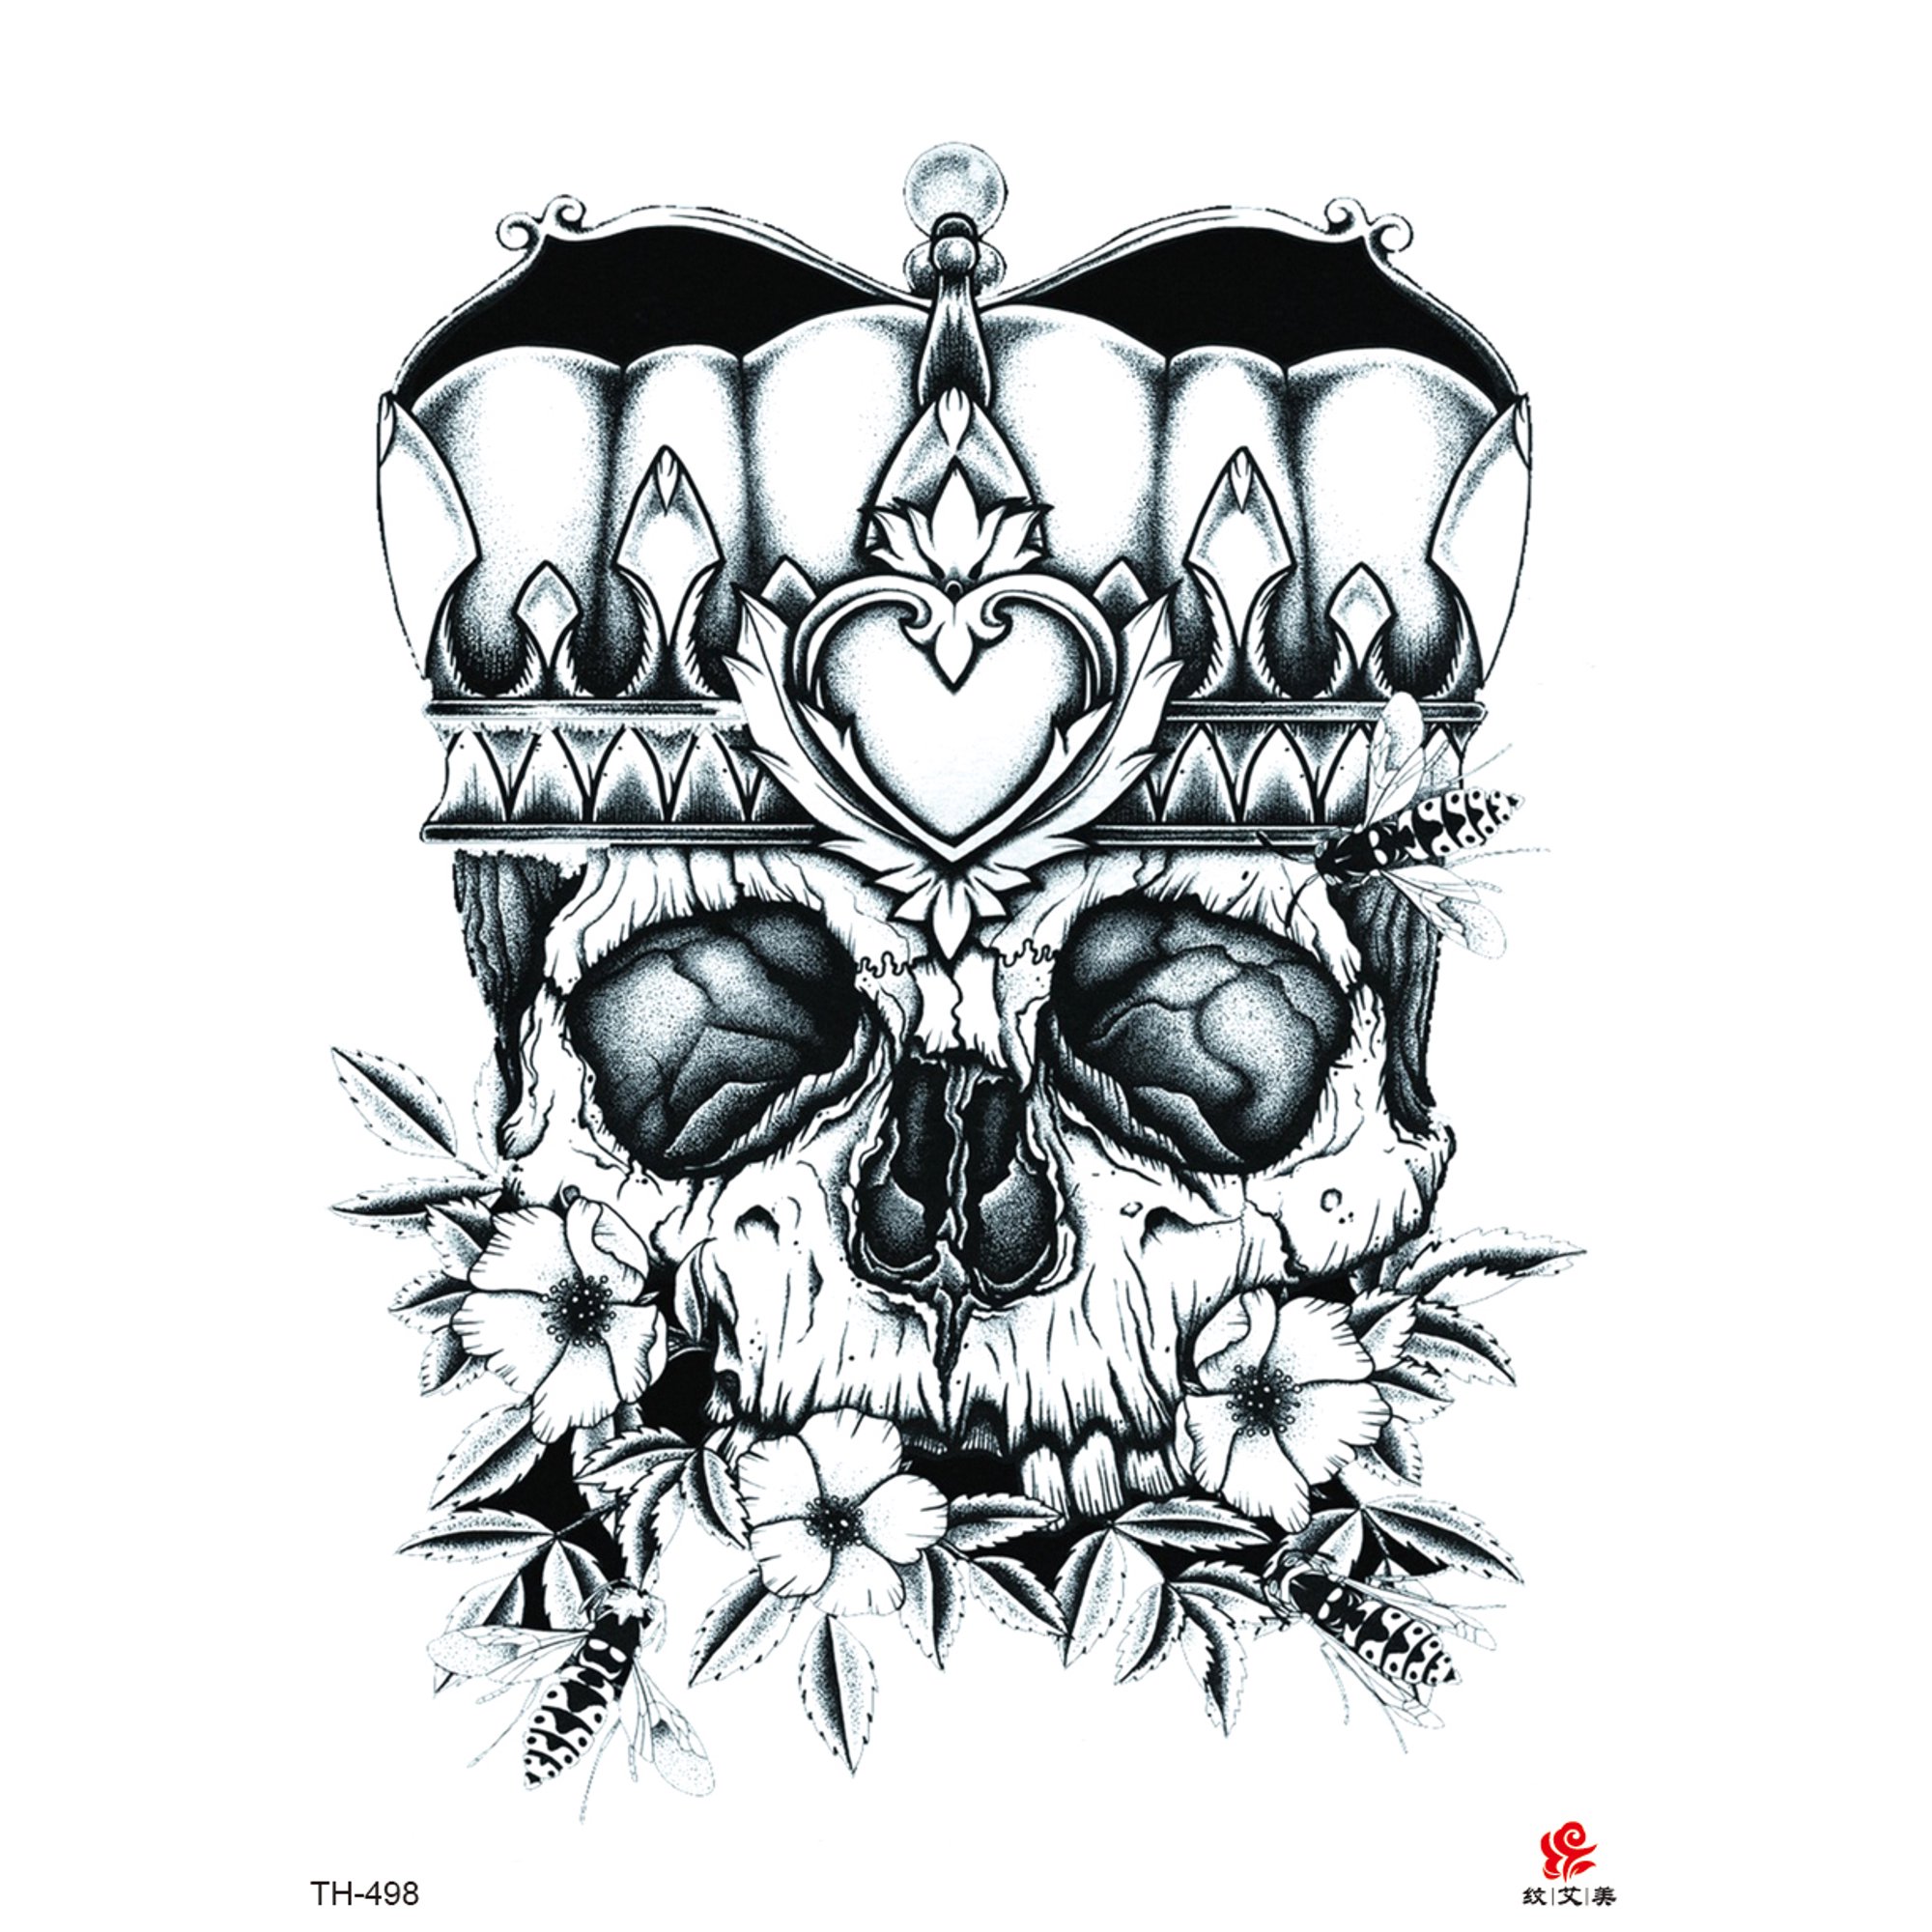 Temporary Tattoo TH-498 Skull With Crown